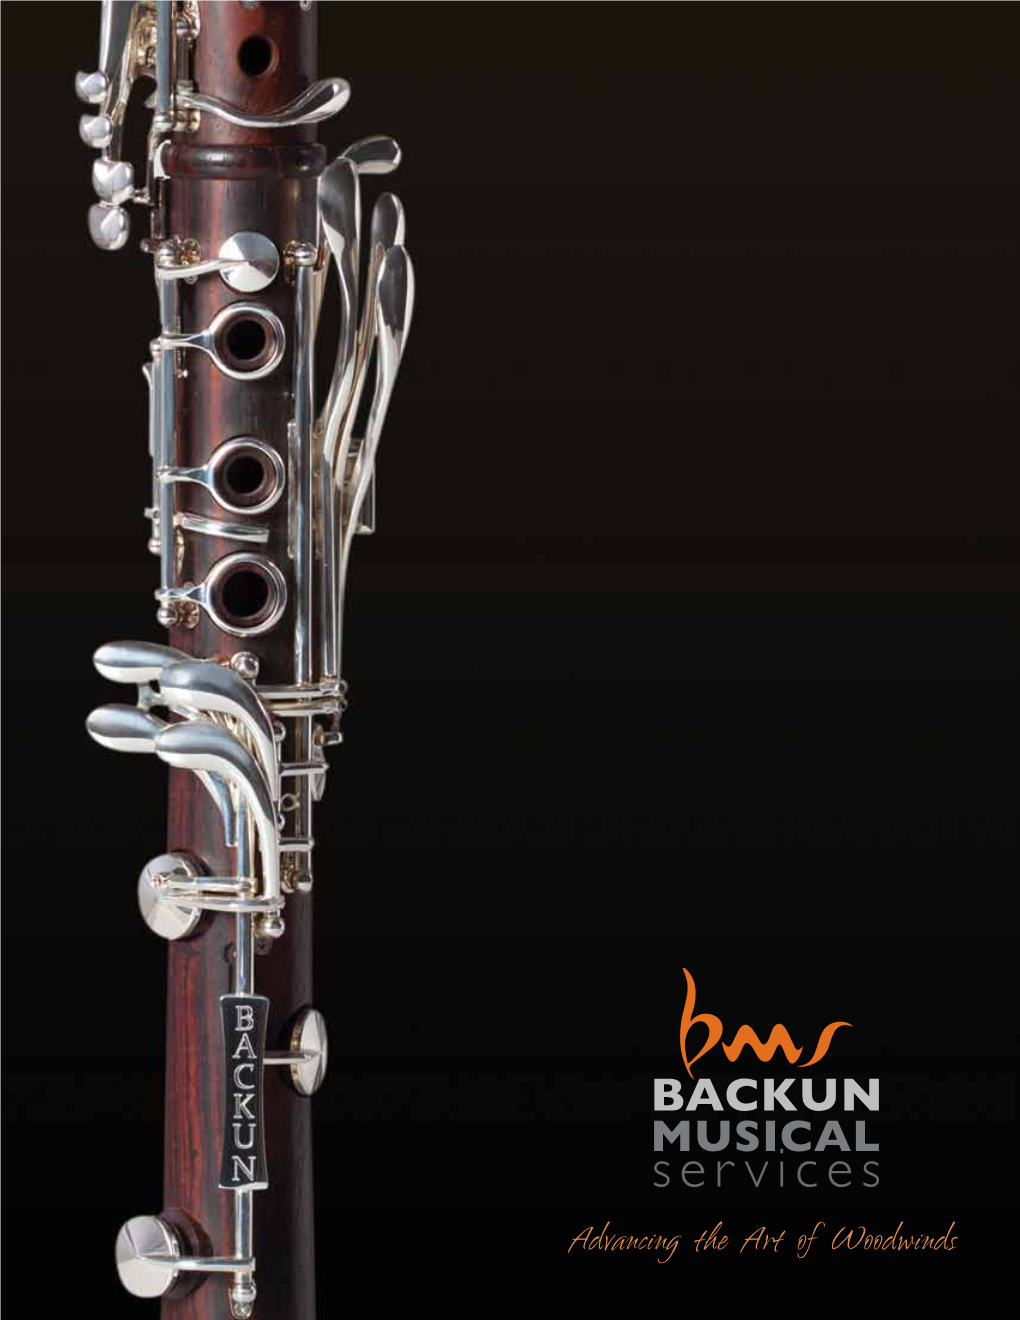 Backun Artist – Our Company Is Constantly Pushing the Boundaries of Art and Acoustics